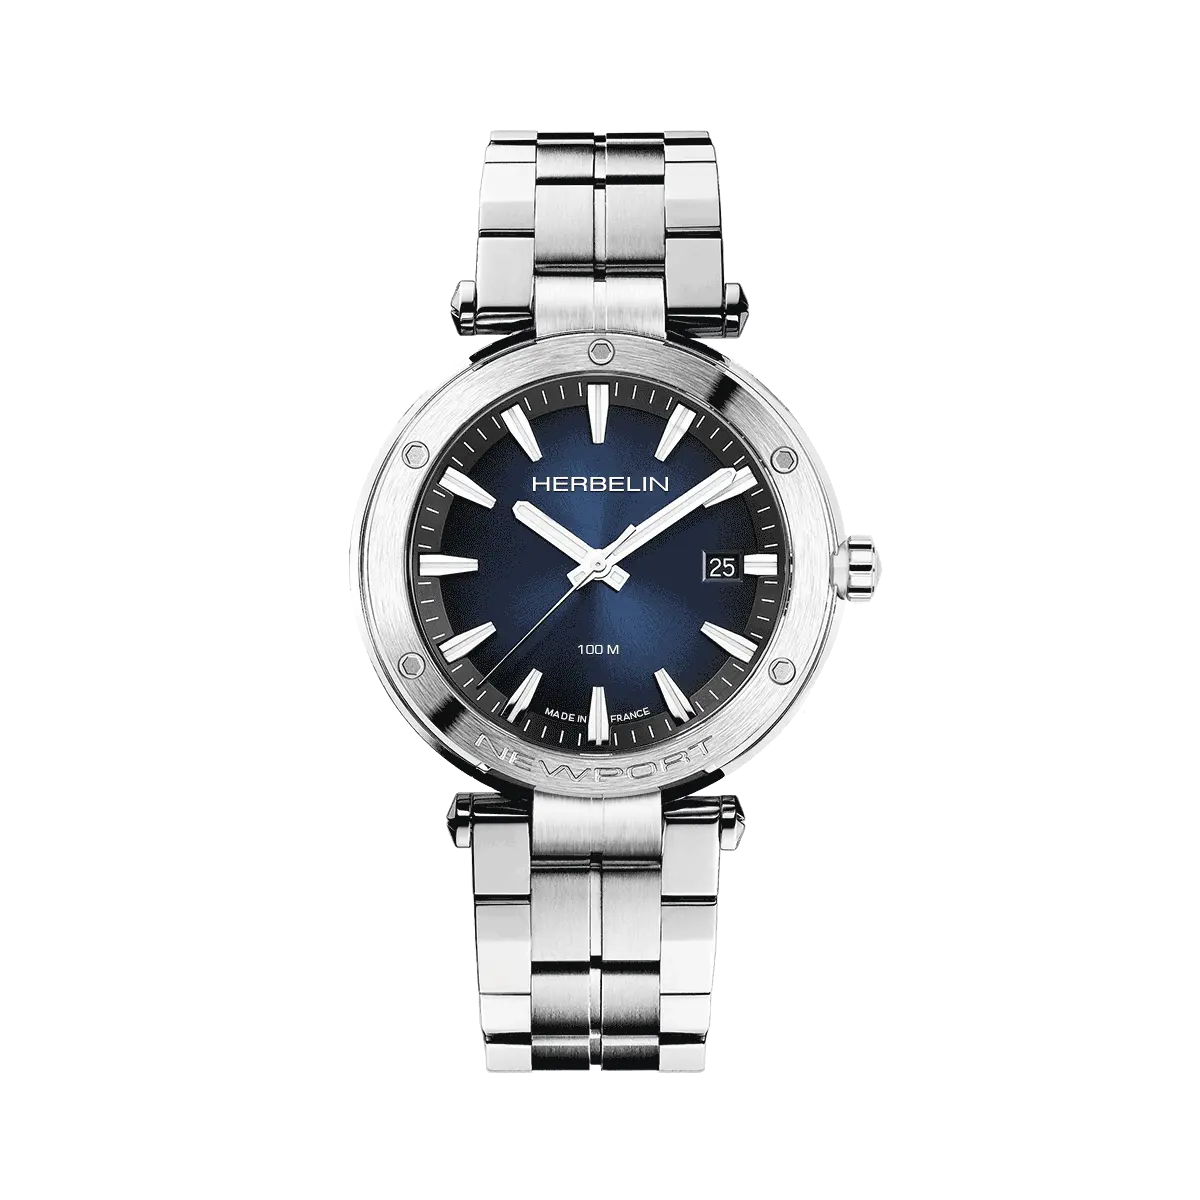 Michel Herbelin Newport Stainless Steel Watch with Blue Dial